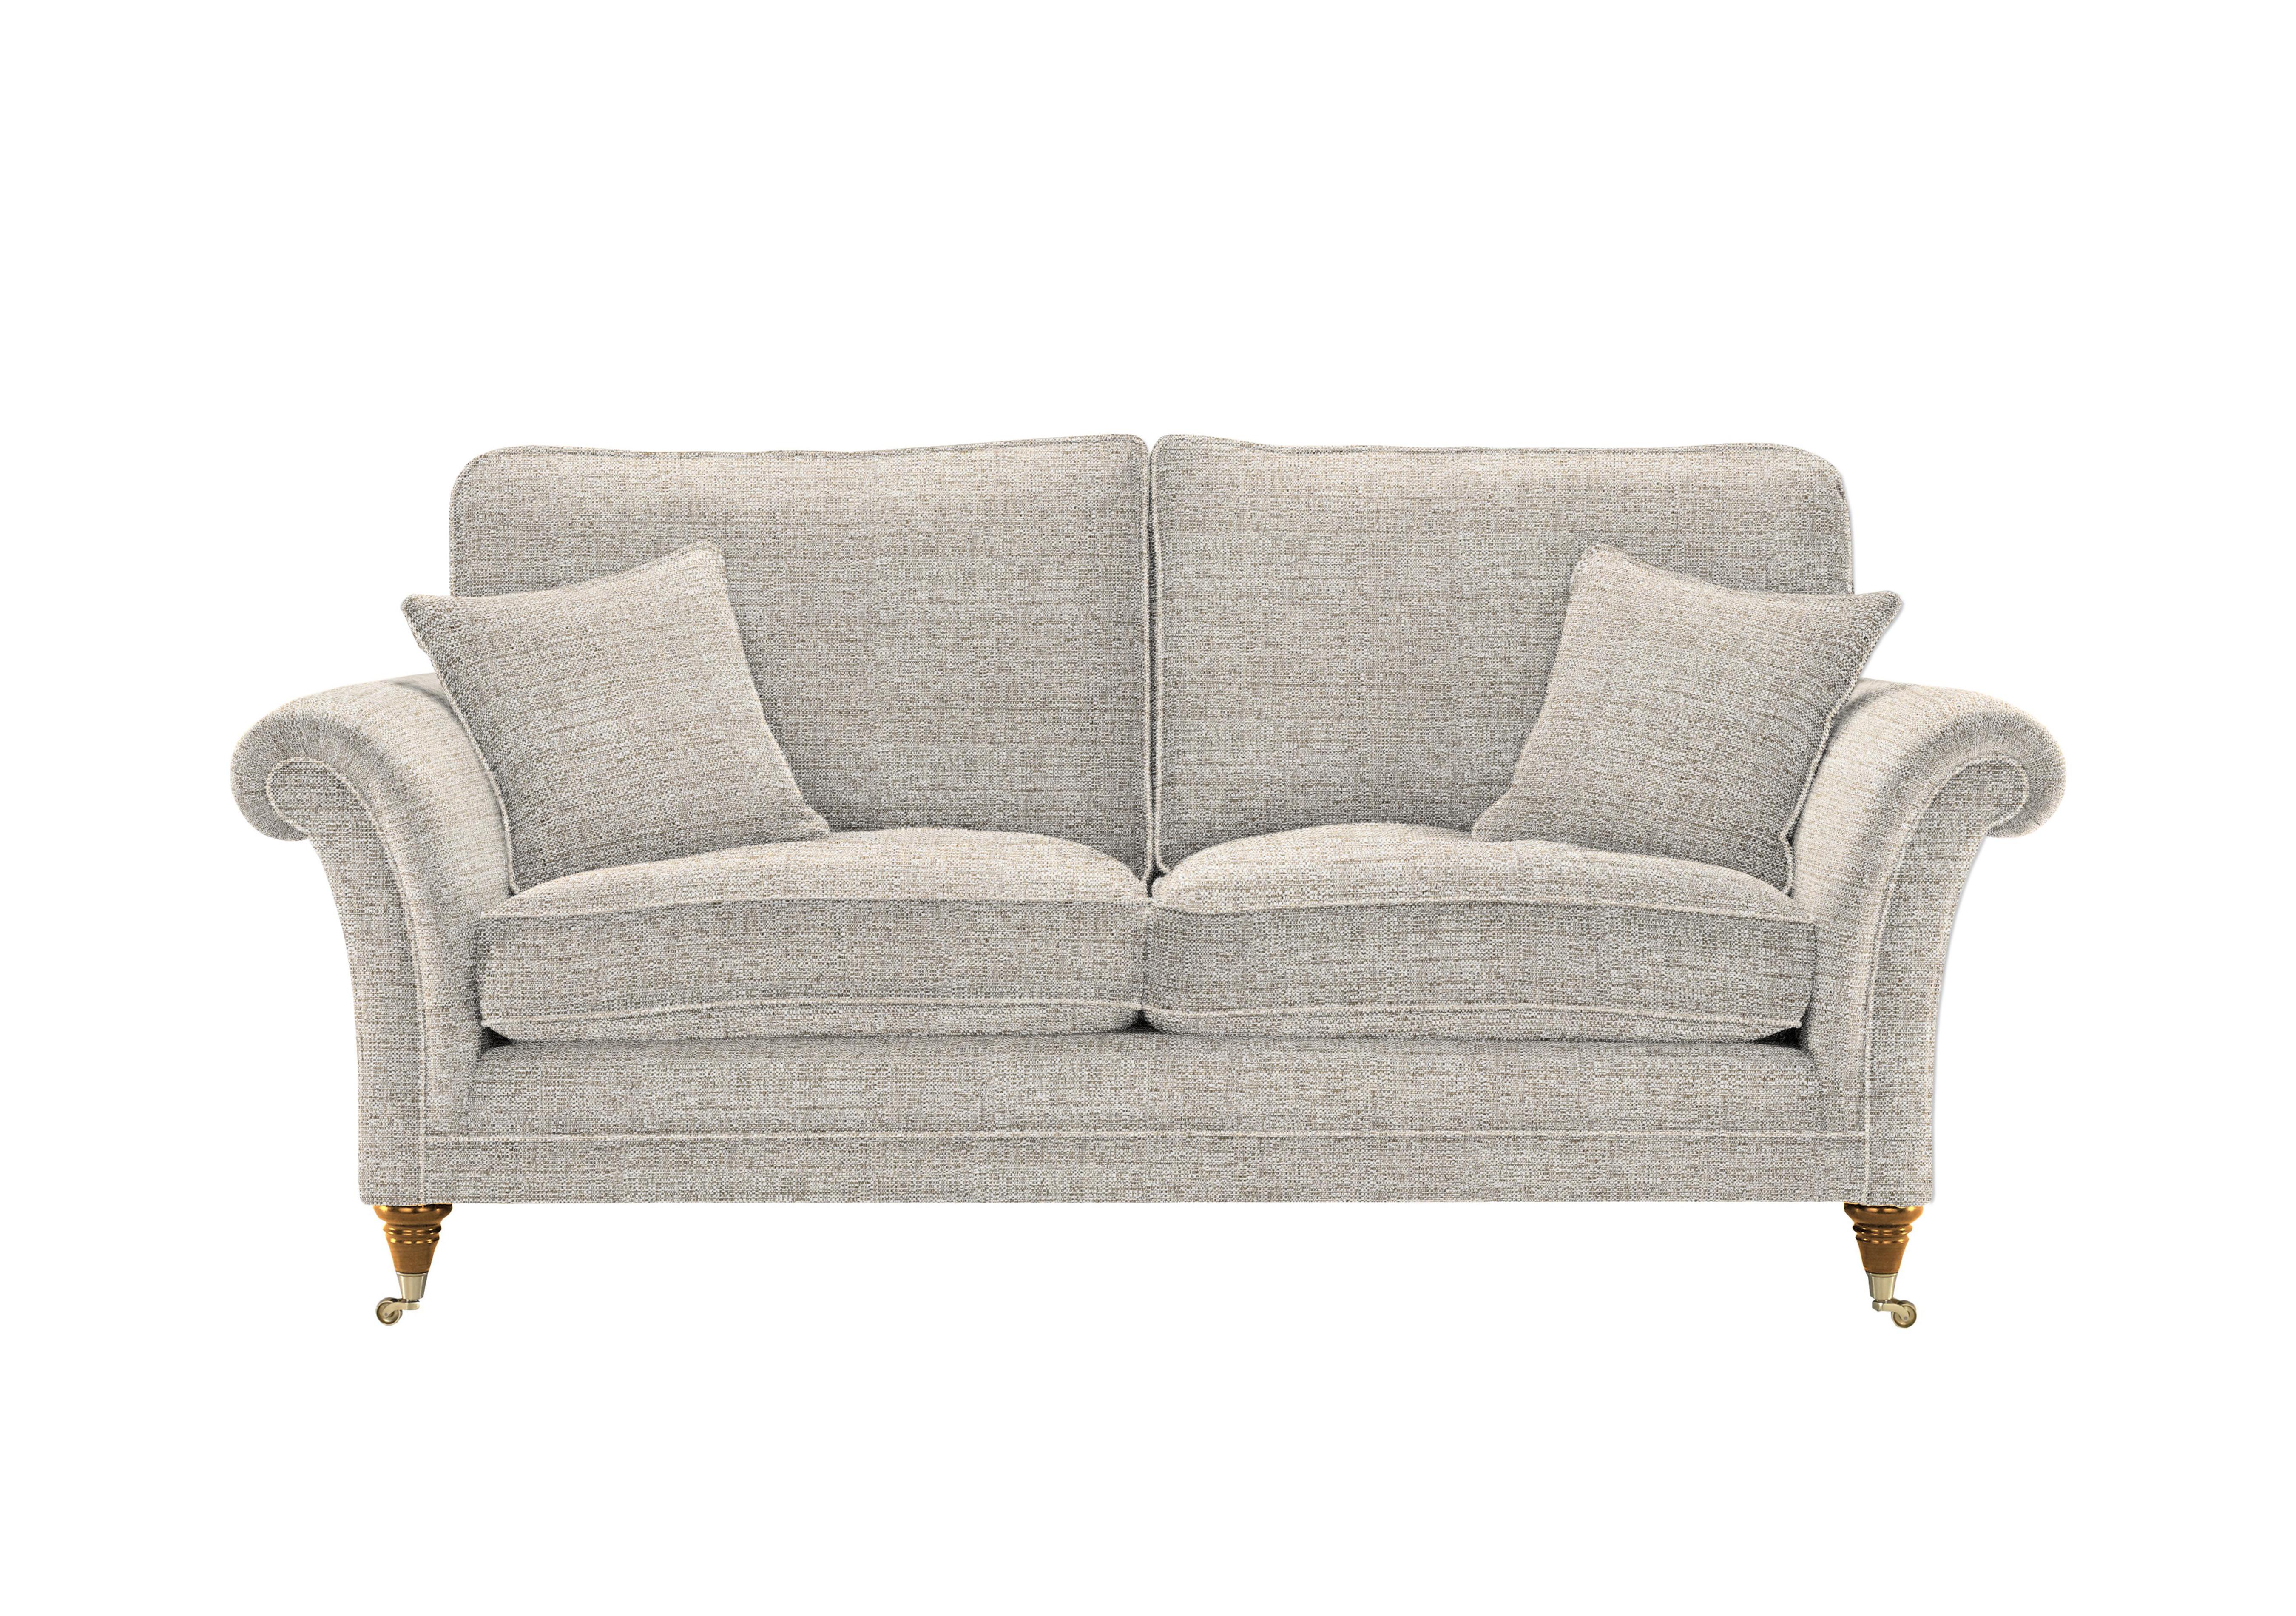 Burghley Large 2 Seater Fabric Sofa in 1300-0059 Caledonian Pebble on Furniture Village